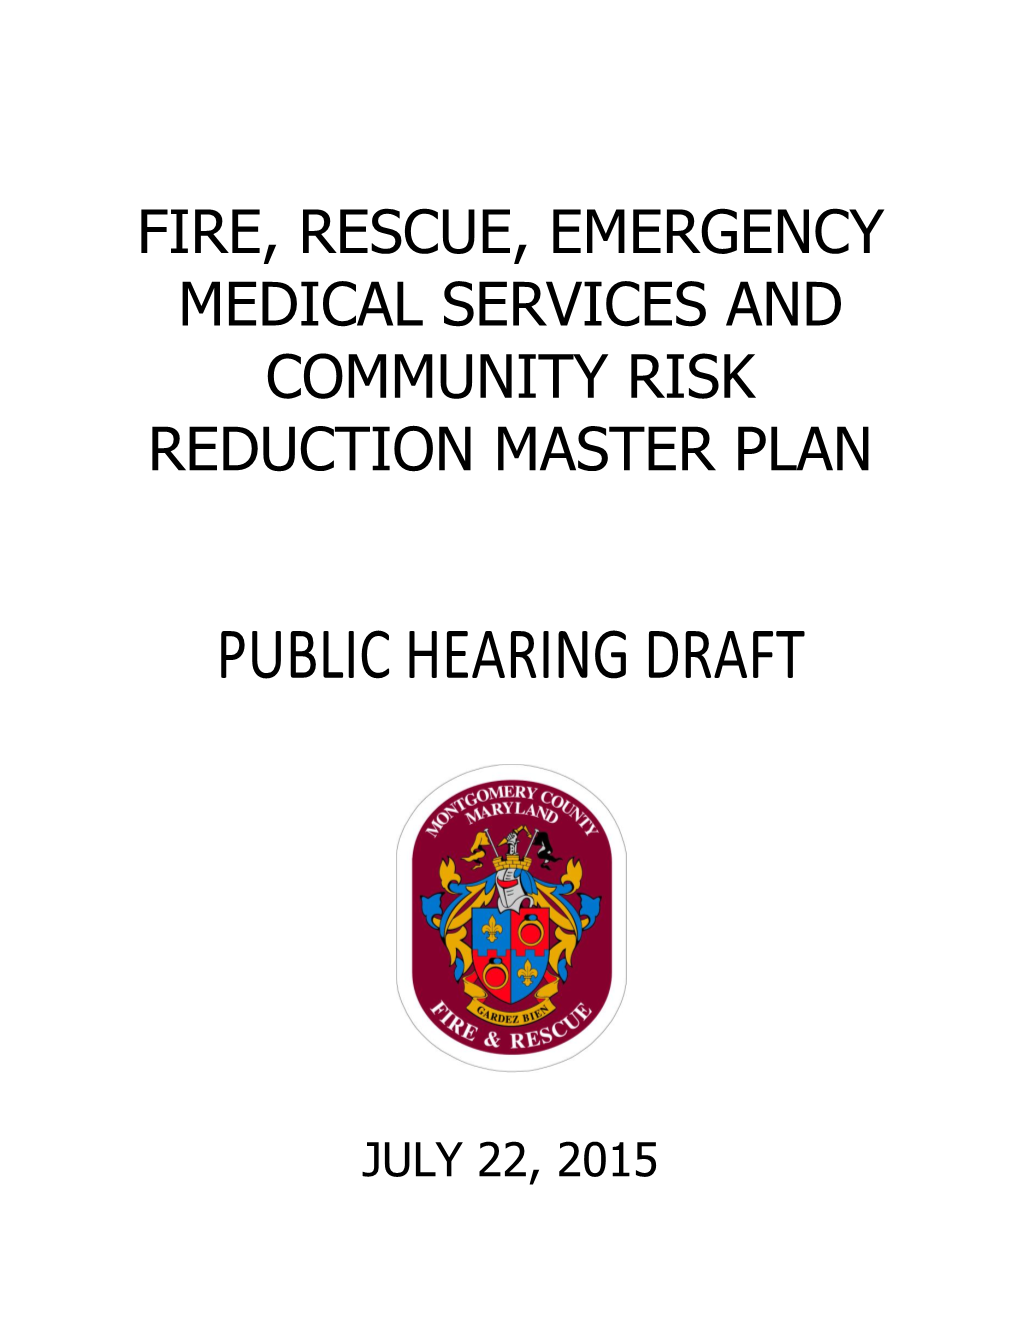 Fire, Rescue, Emergency Medical Services and Community Risk Reduction Master Plan